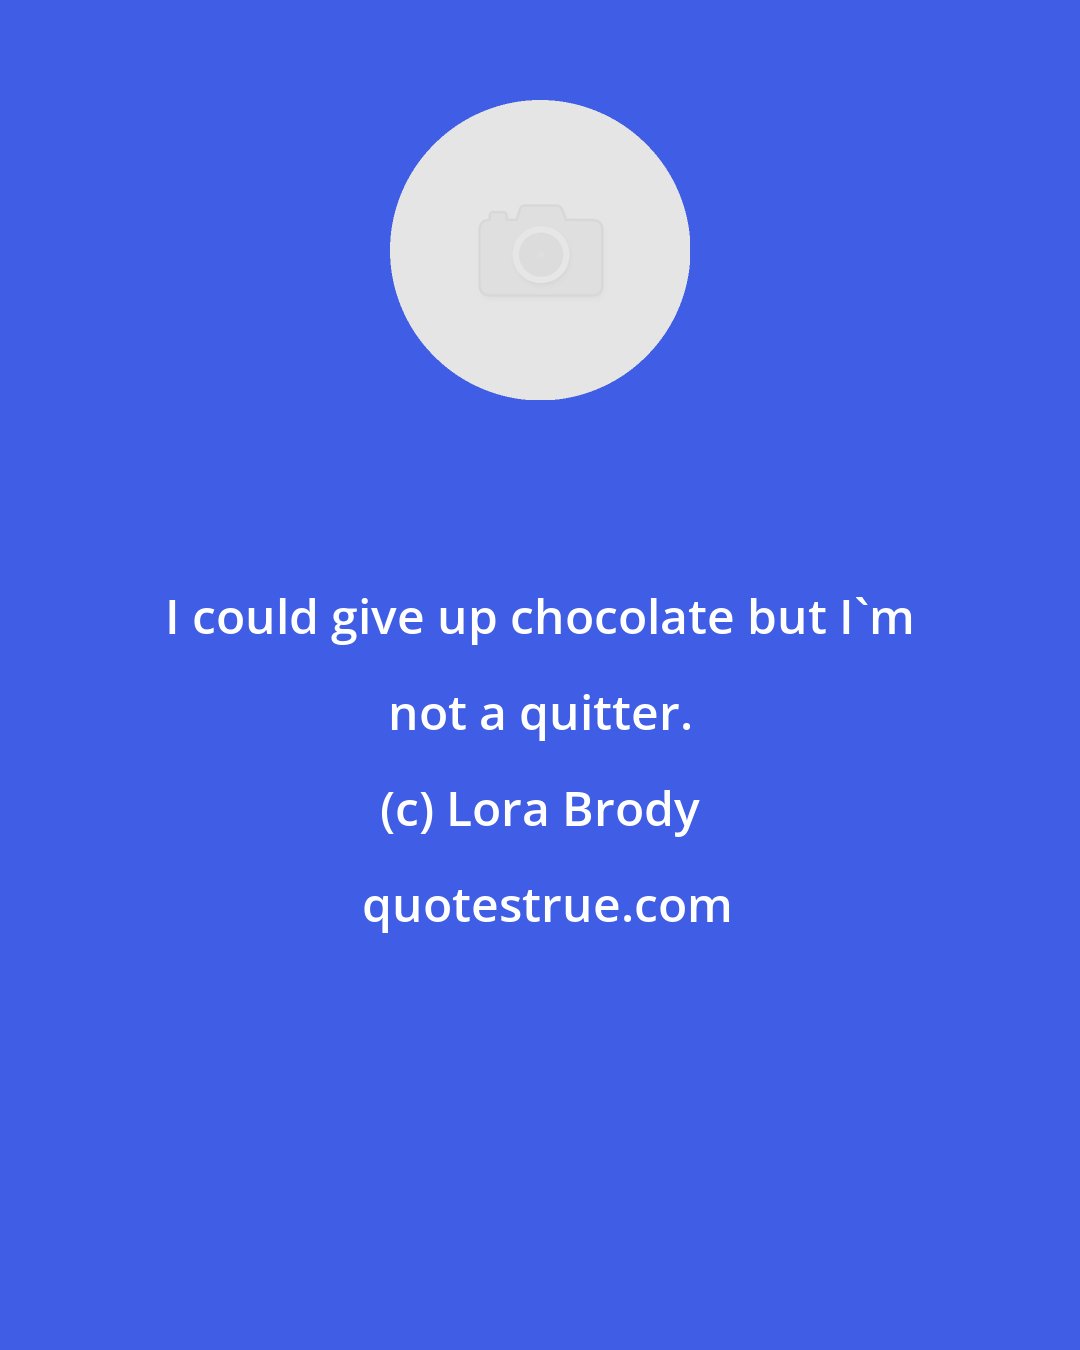 Lora Brody: I could give up chocolate but I'm not a quitter.